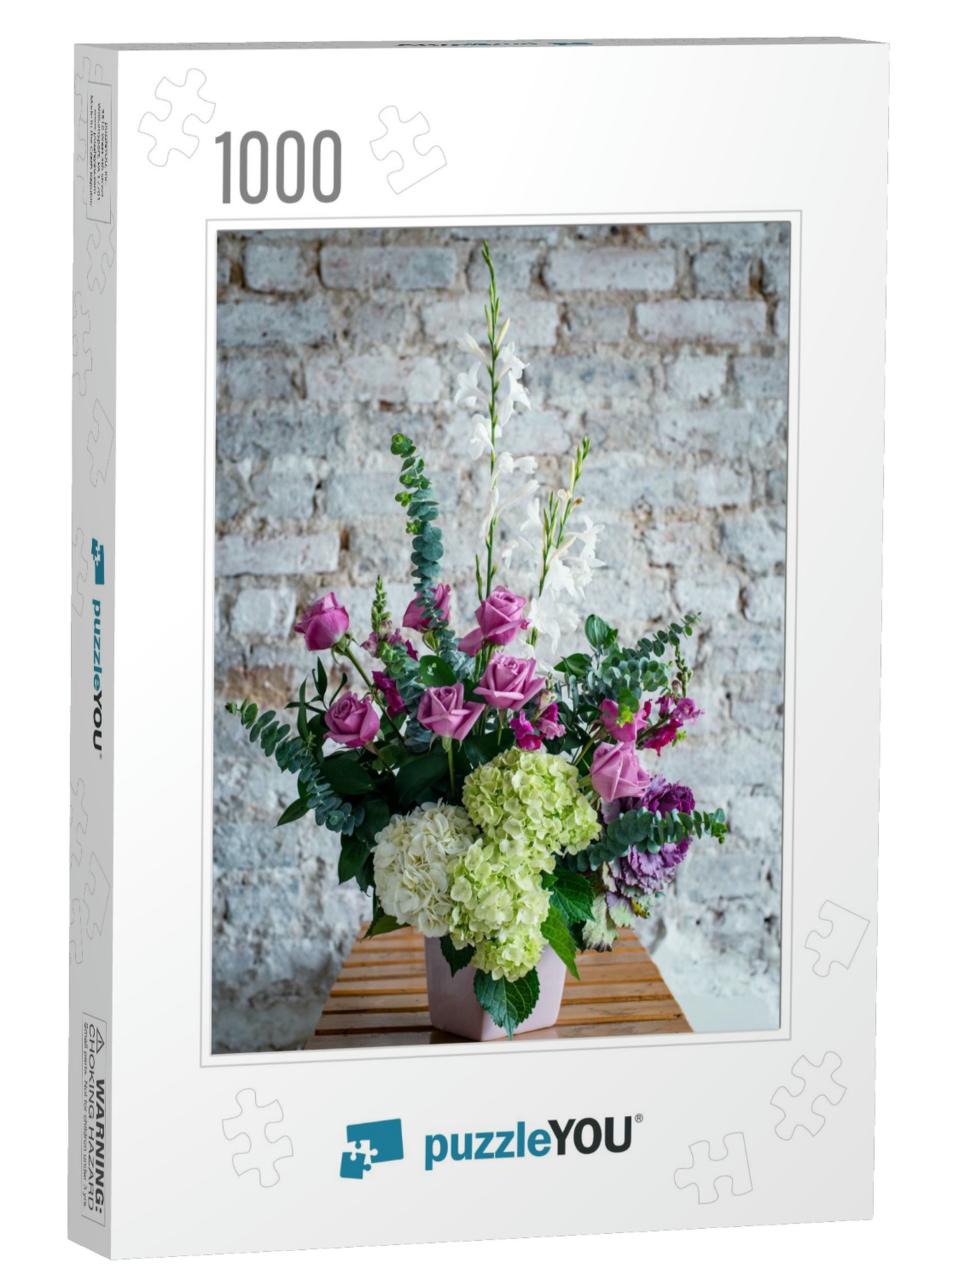 Decorative Flowers of Colombia, Floral Arrangements... Jigsaw Puzzle with 1000 pieces